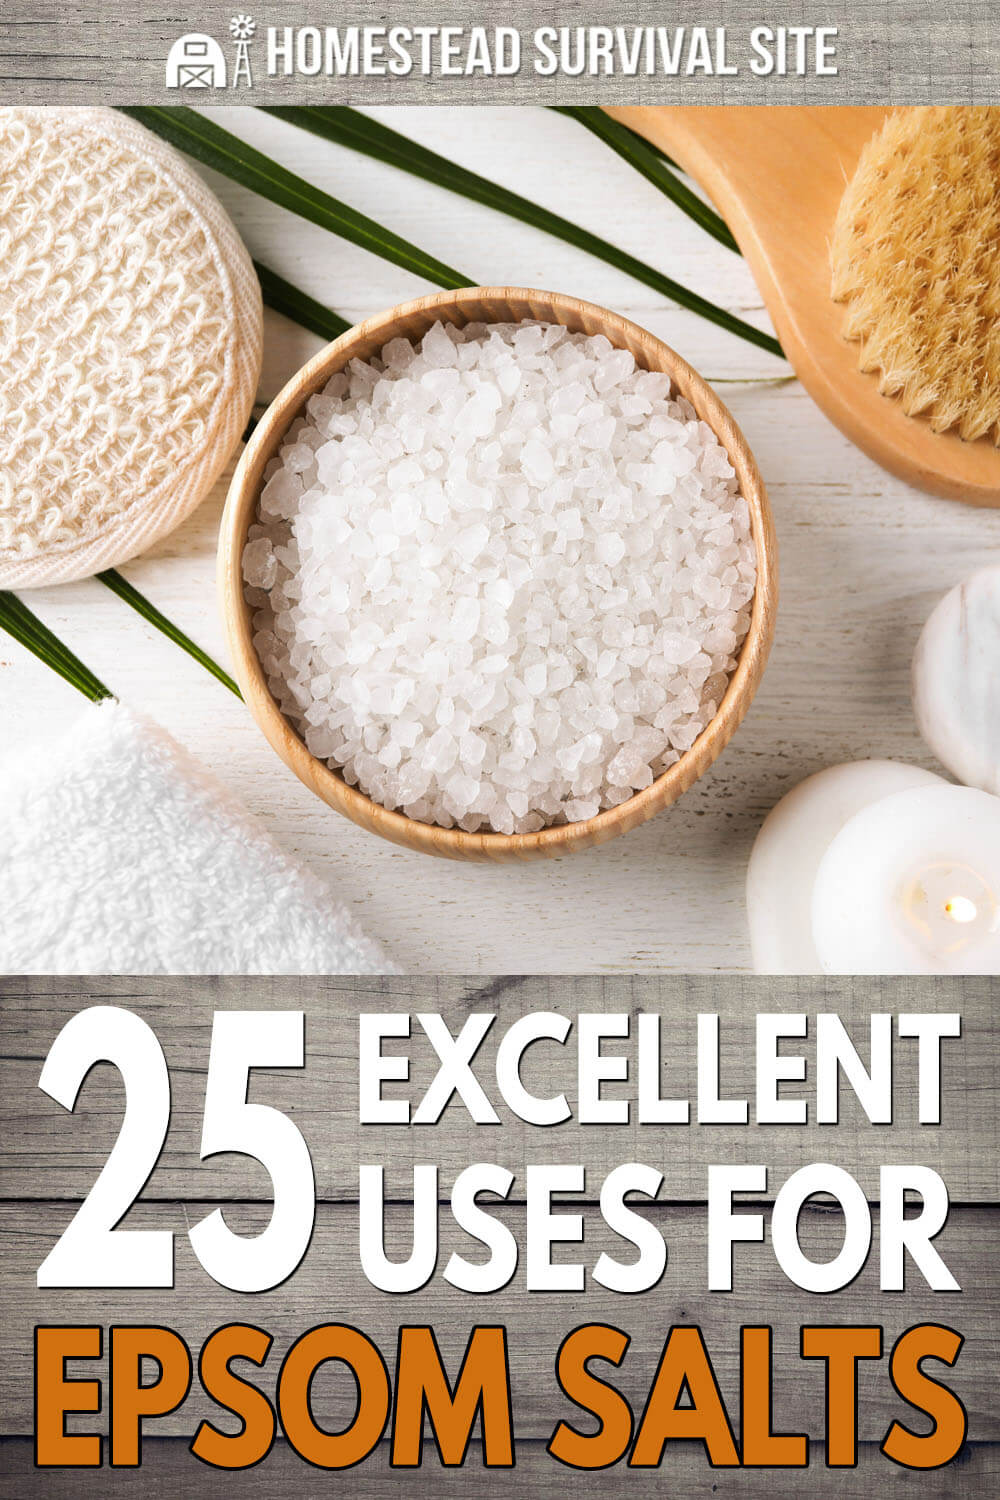 25 Excellent Uses for Epsom Salts